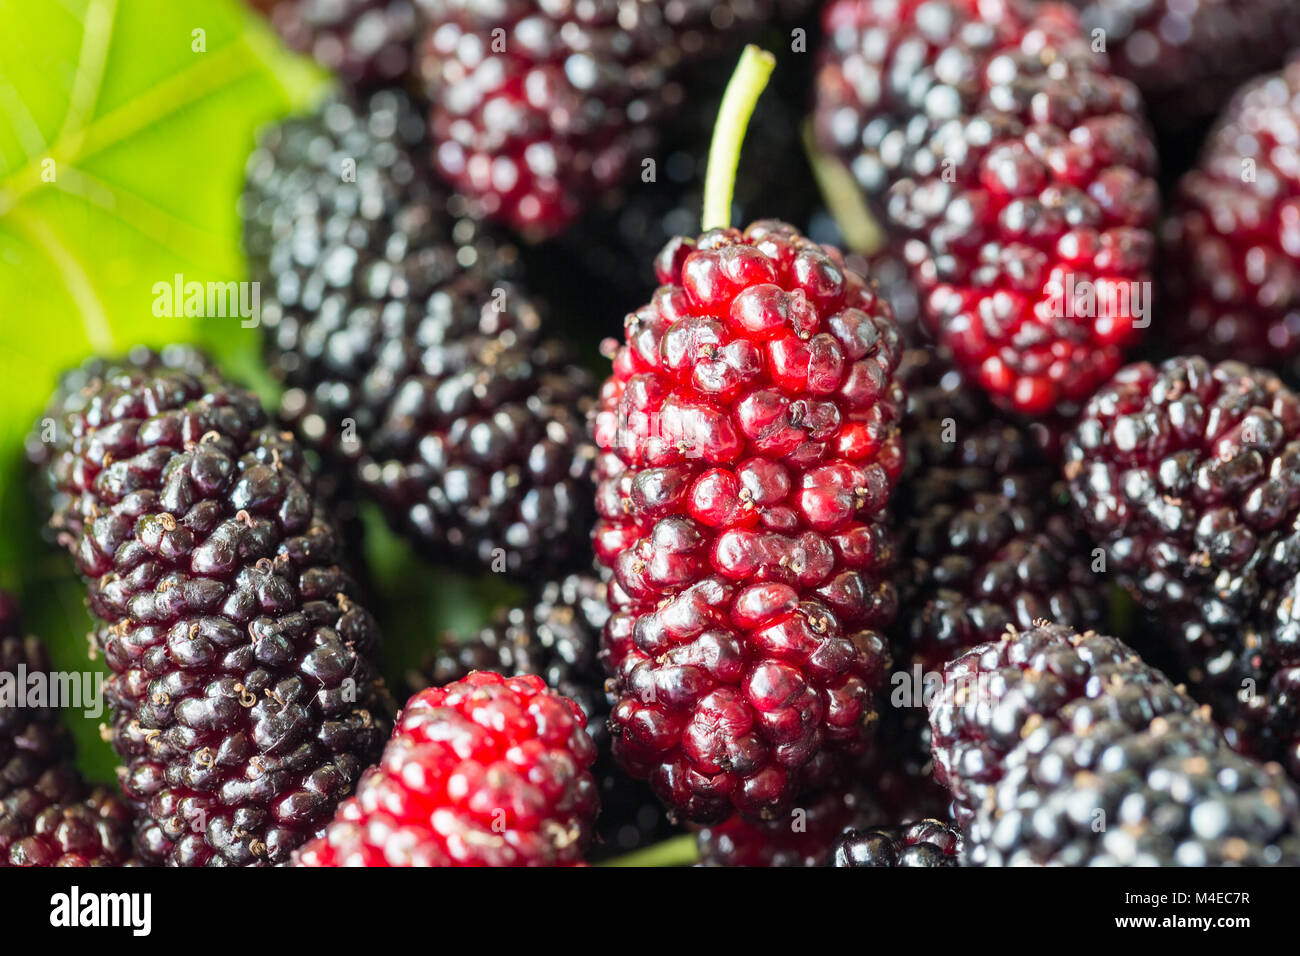 Frisches Obst Maulbeere closeup Stockfoto